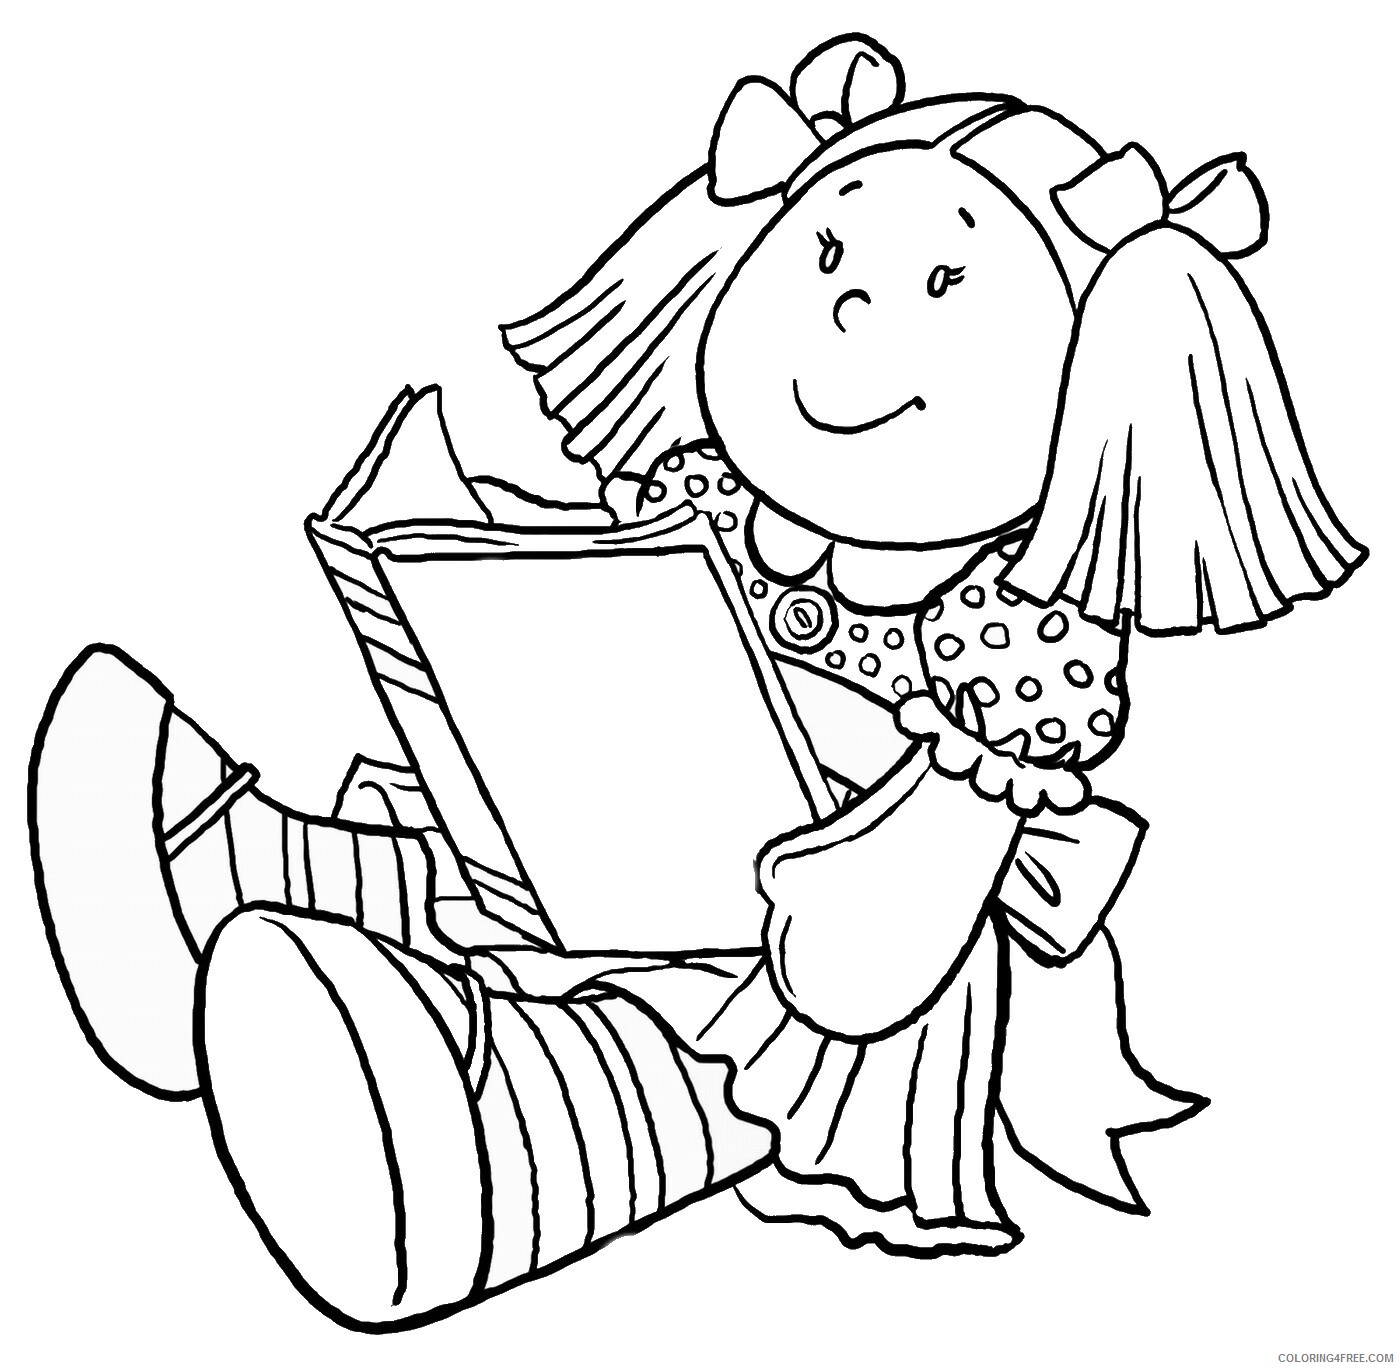 Doll Coloring Pages for Girls dolls_11 Printable 2021 0375 Coloring4free